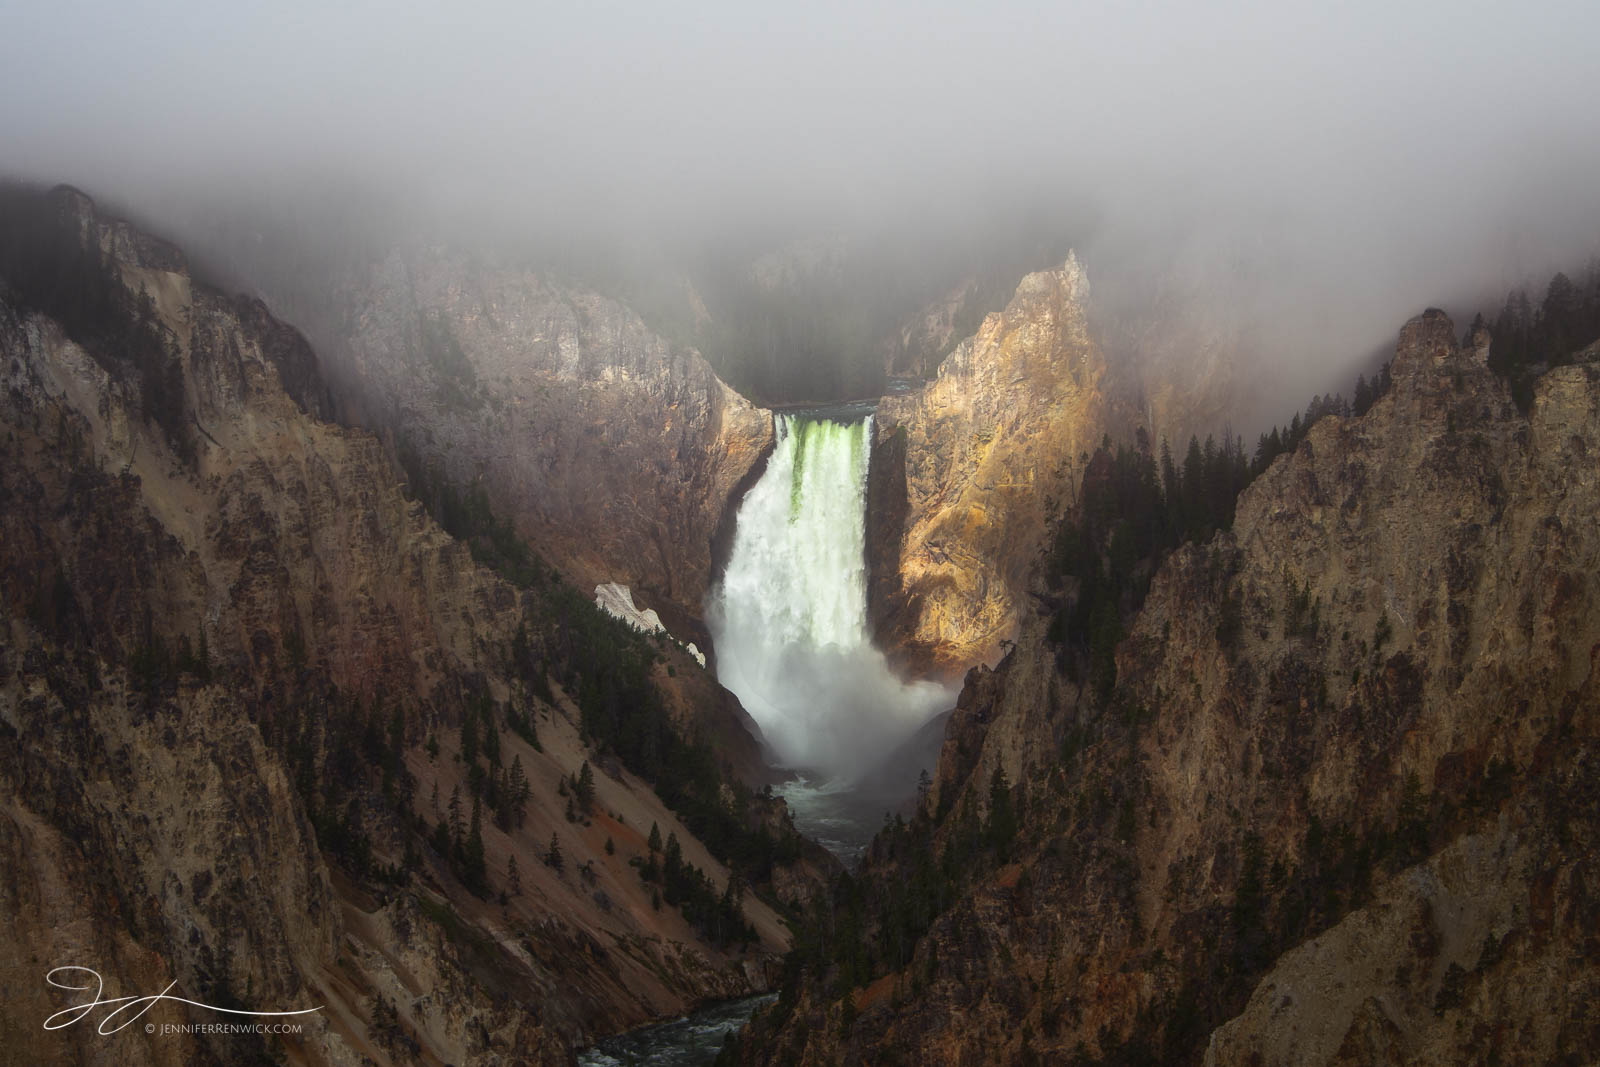 The morning sun spotlights the Lower Falls as clouds and fog clear.